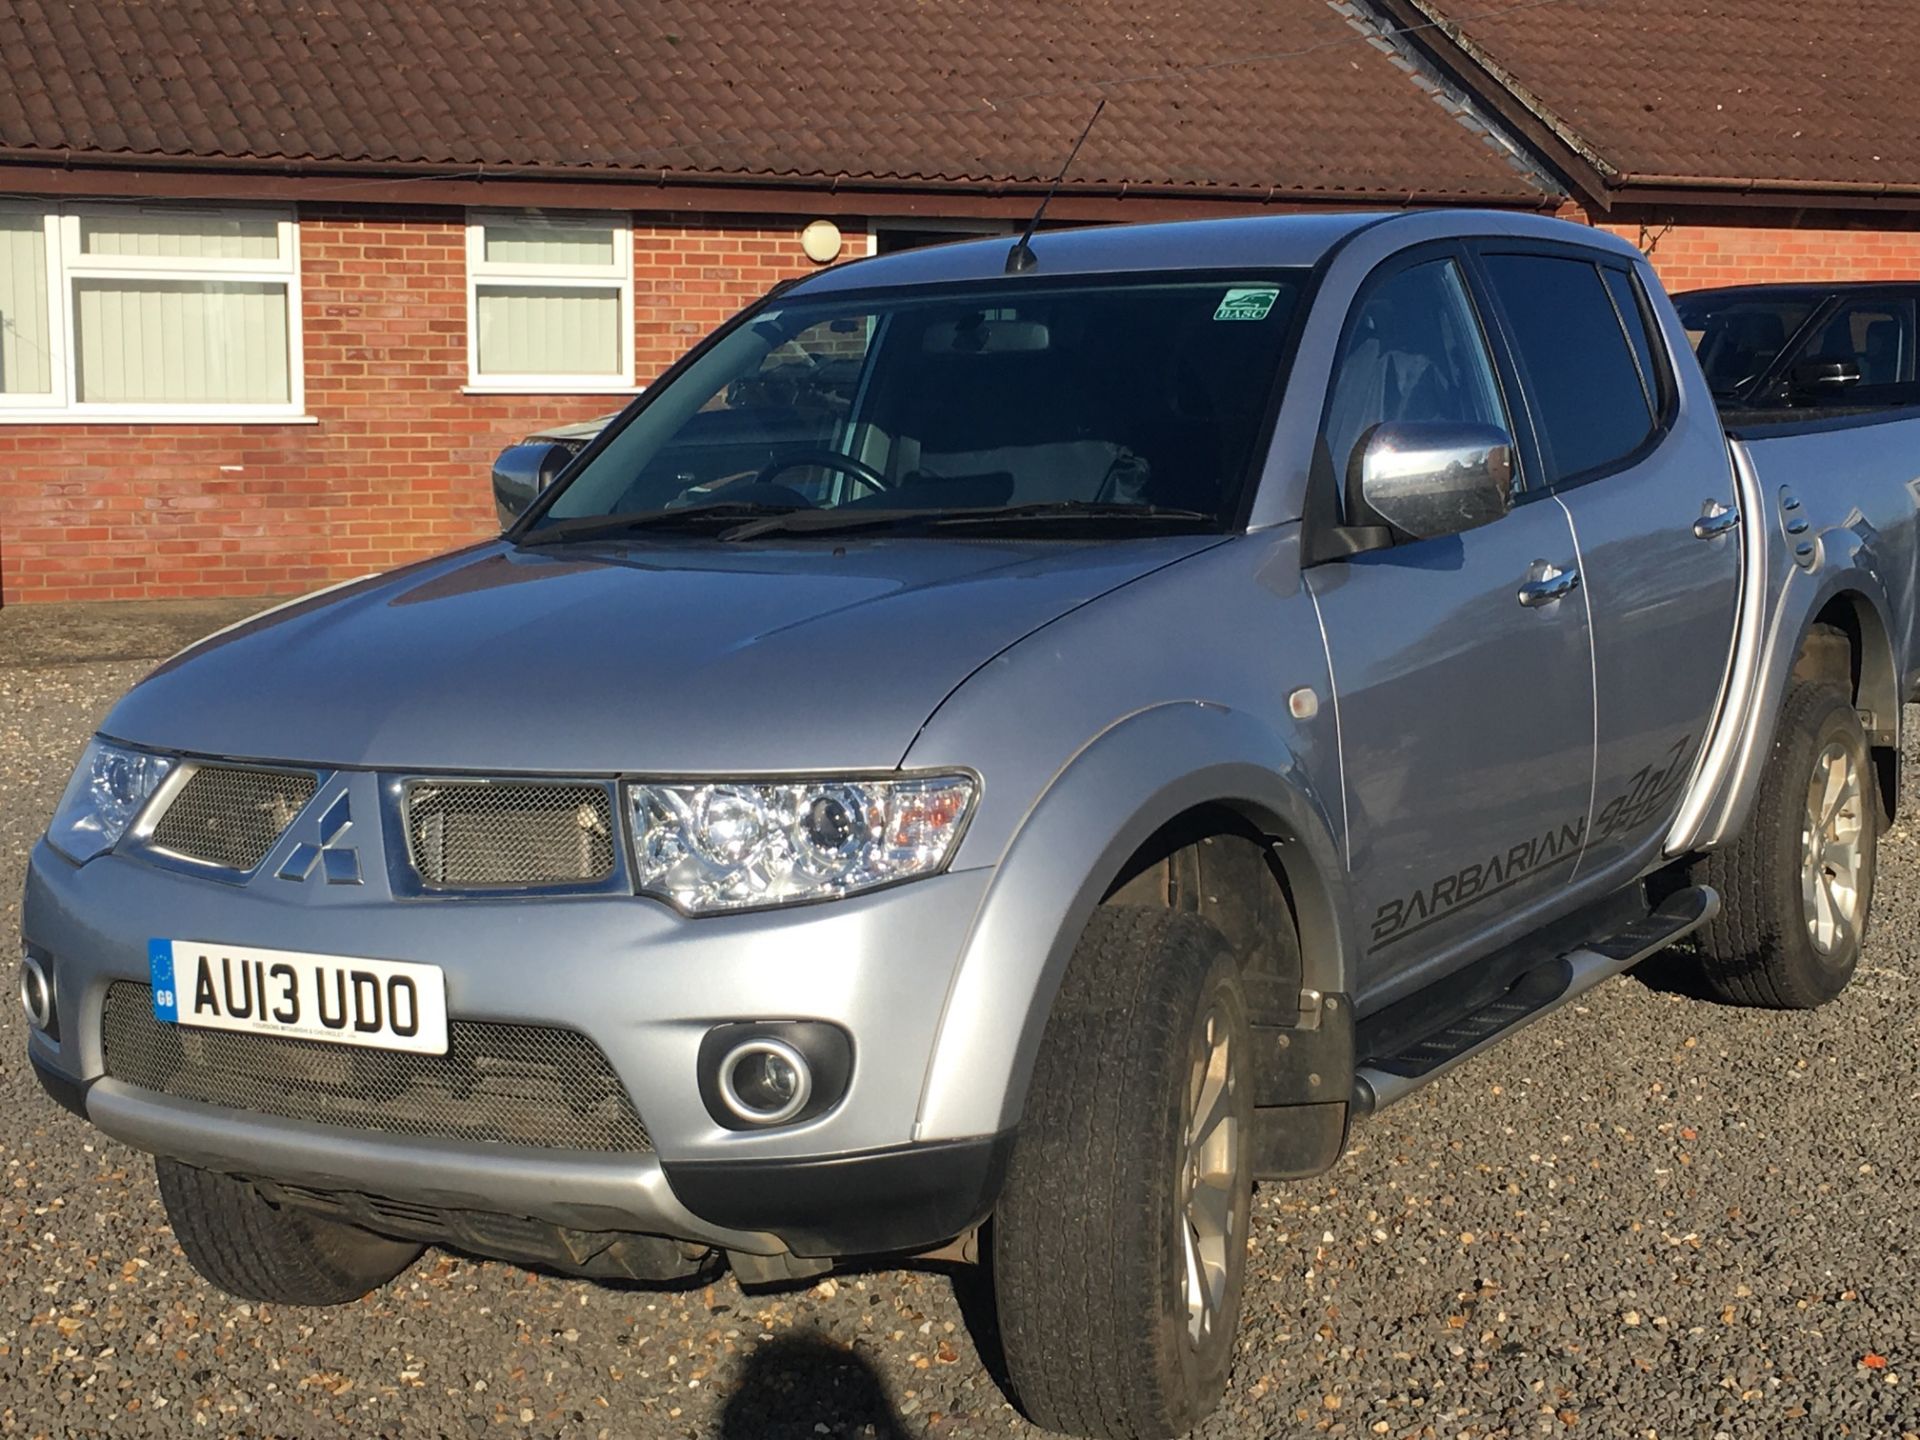 2013 13 reg MITSUBISHI BARBARIAN 4X4 DOUBLE CAB PICK UP TRUCK 1 OWNER FROM NEW, LOW MILEAGE 24k - Image 3 of 22